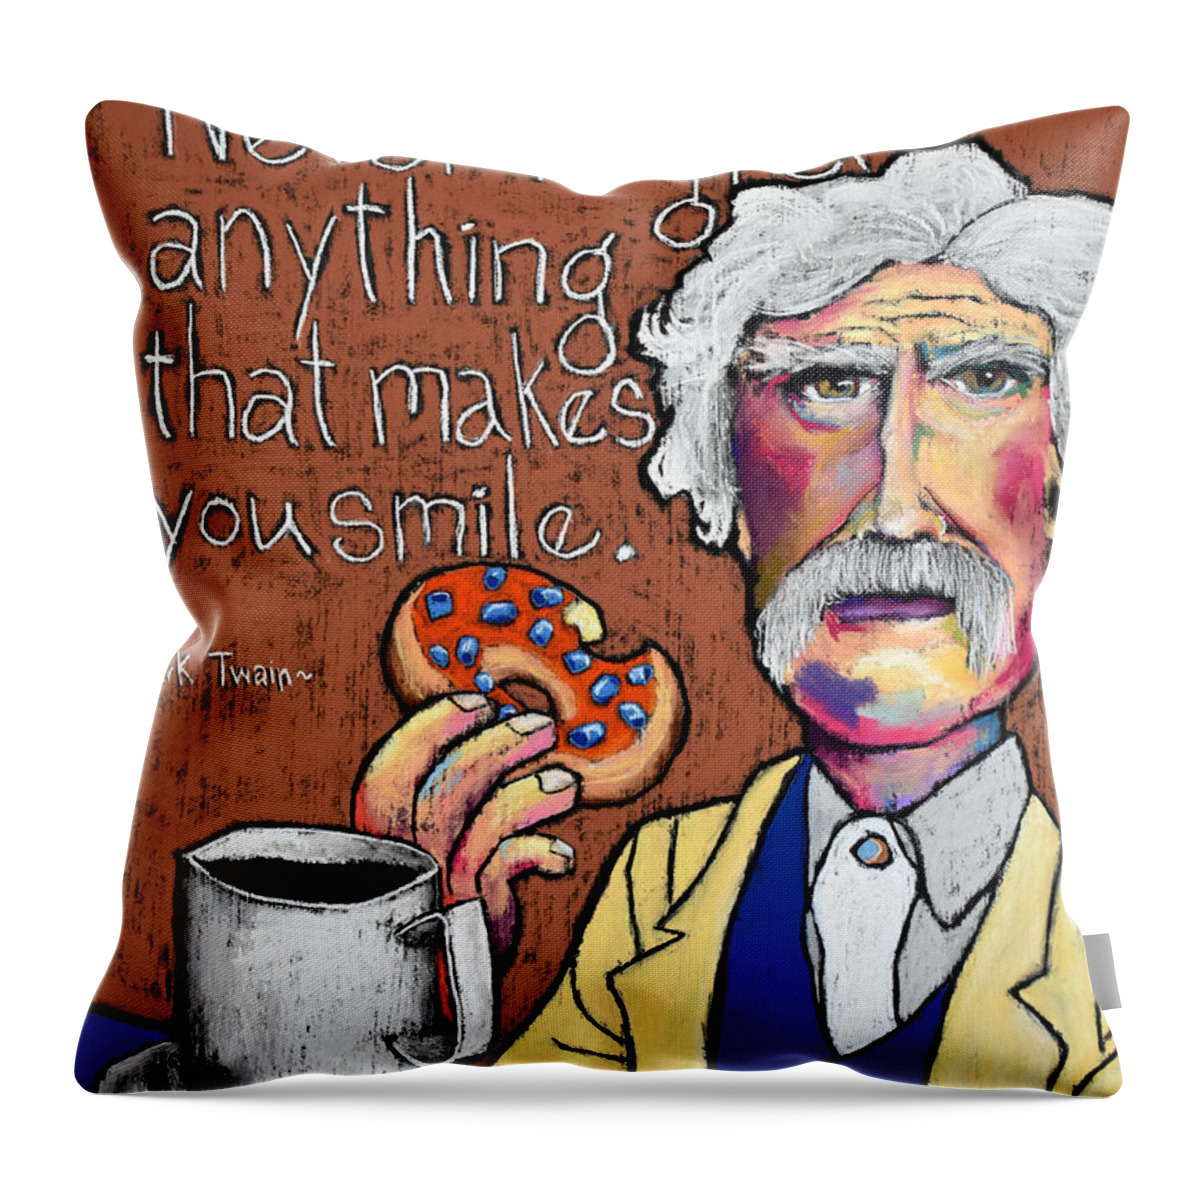 Mark Throw Pillow featuring the painting M. Twain by David Hinds